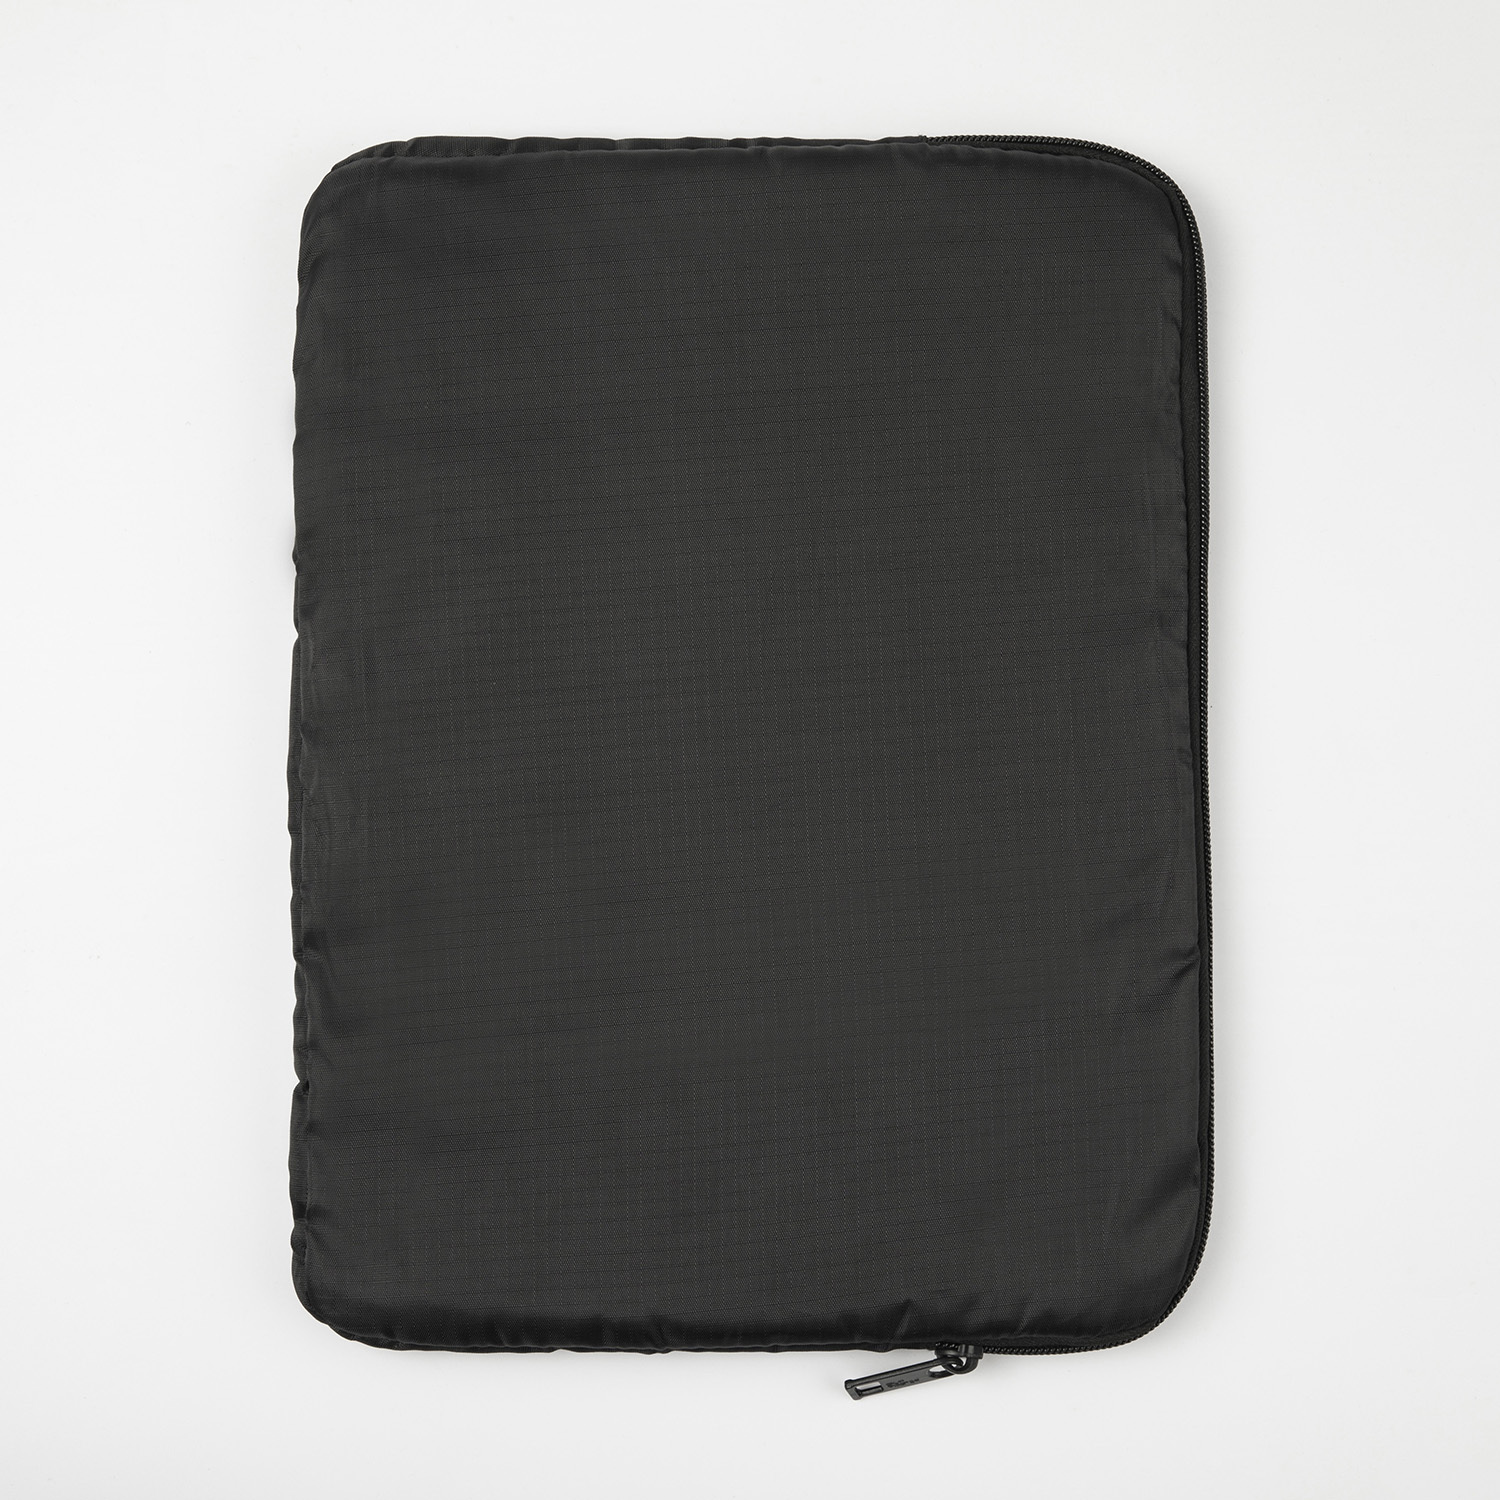 All-Over Print Laptop Sleeves for Customization - Print On Demand | HugePOD-3